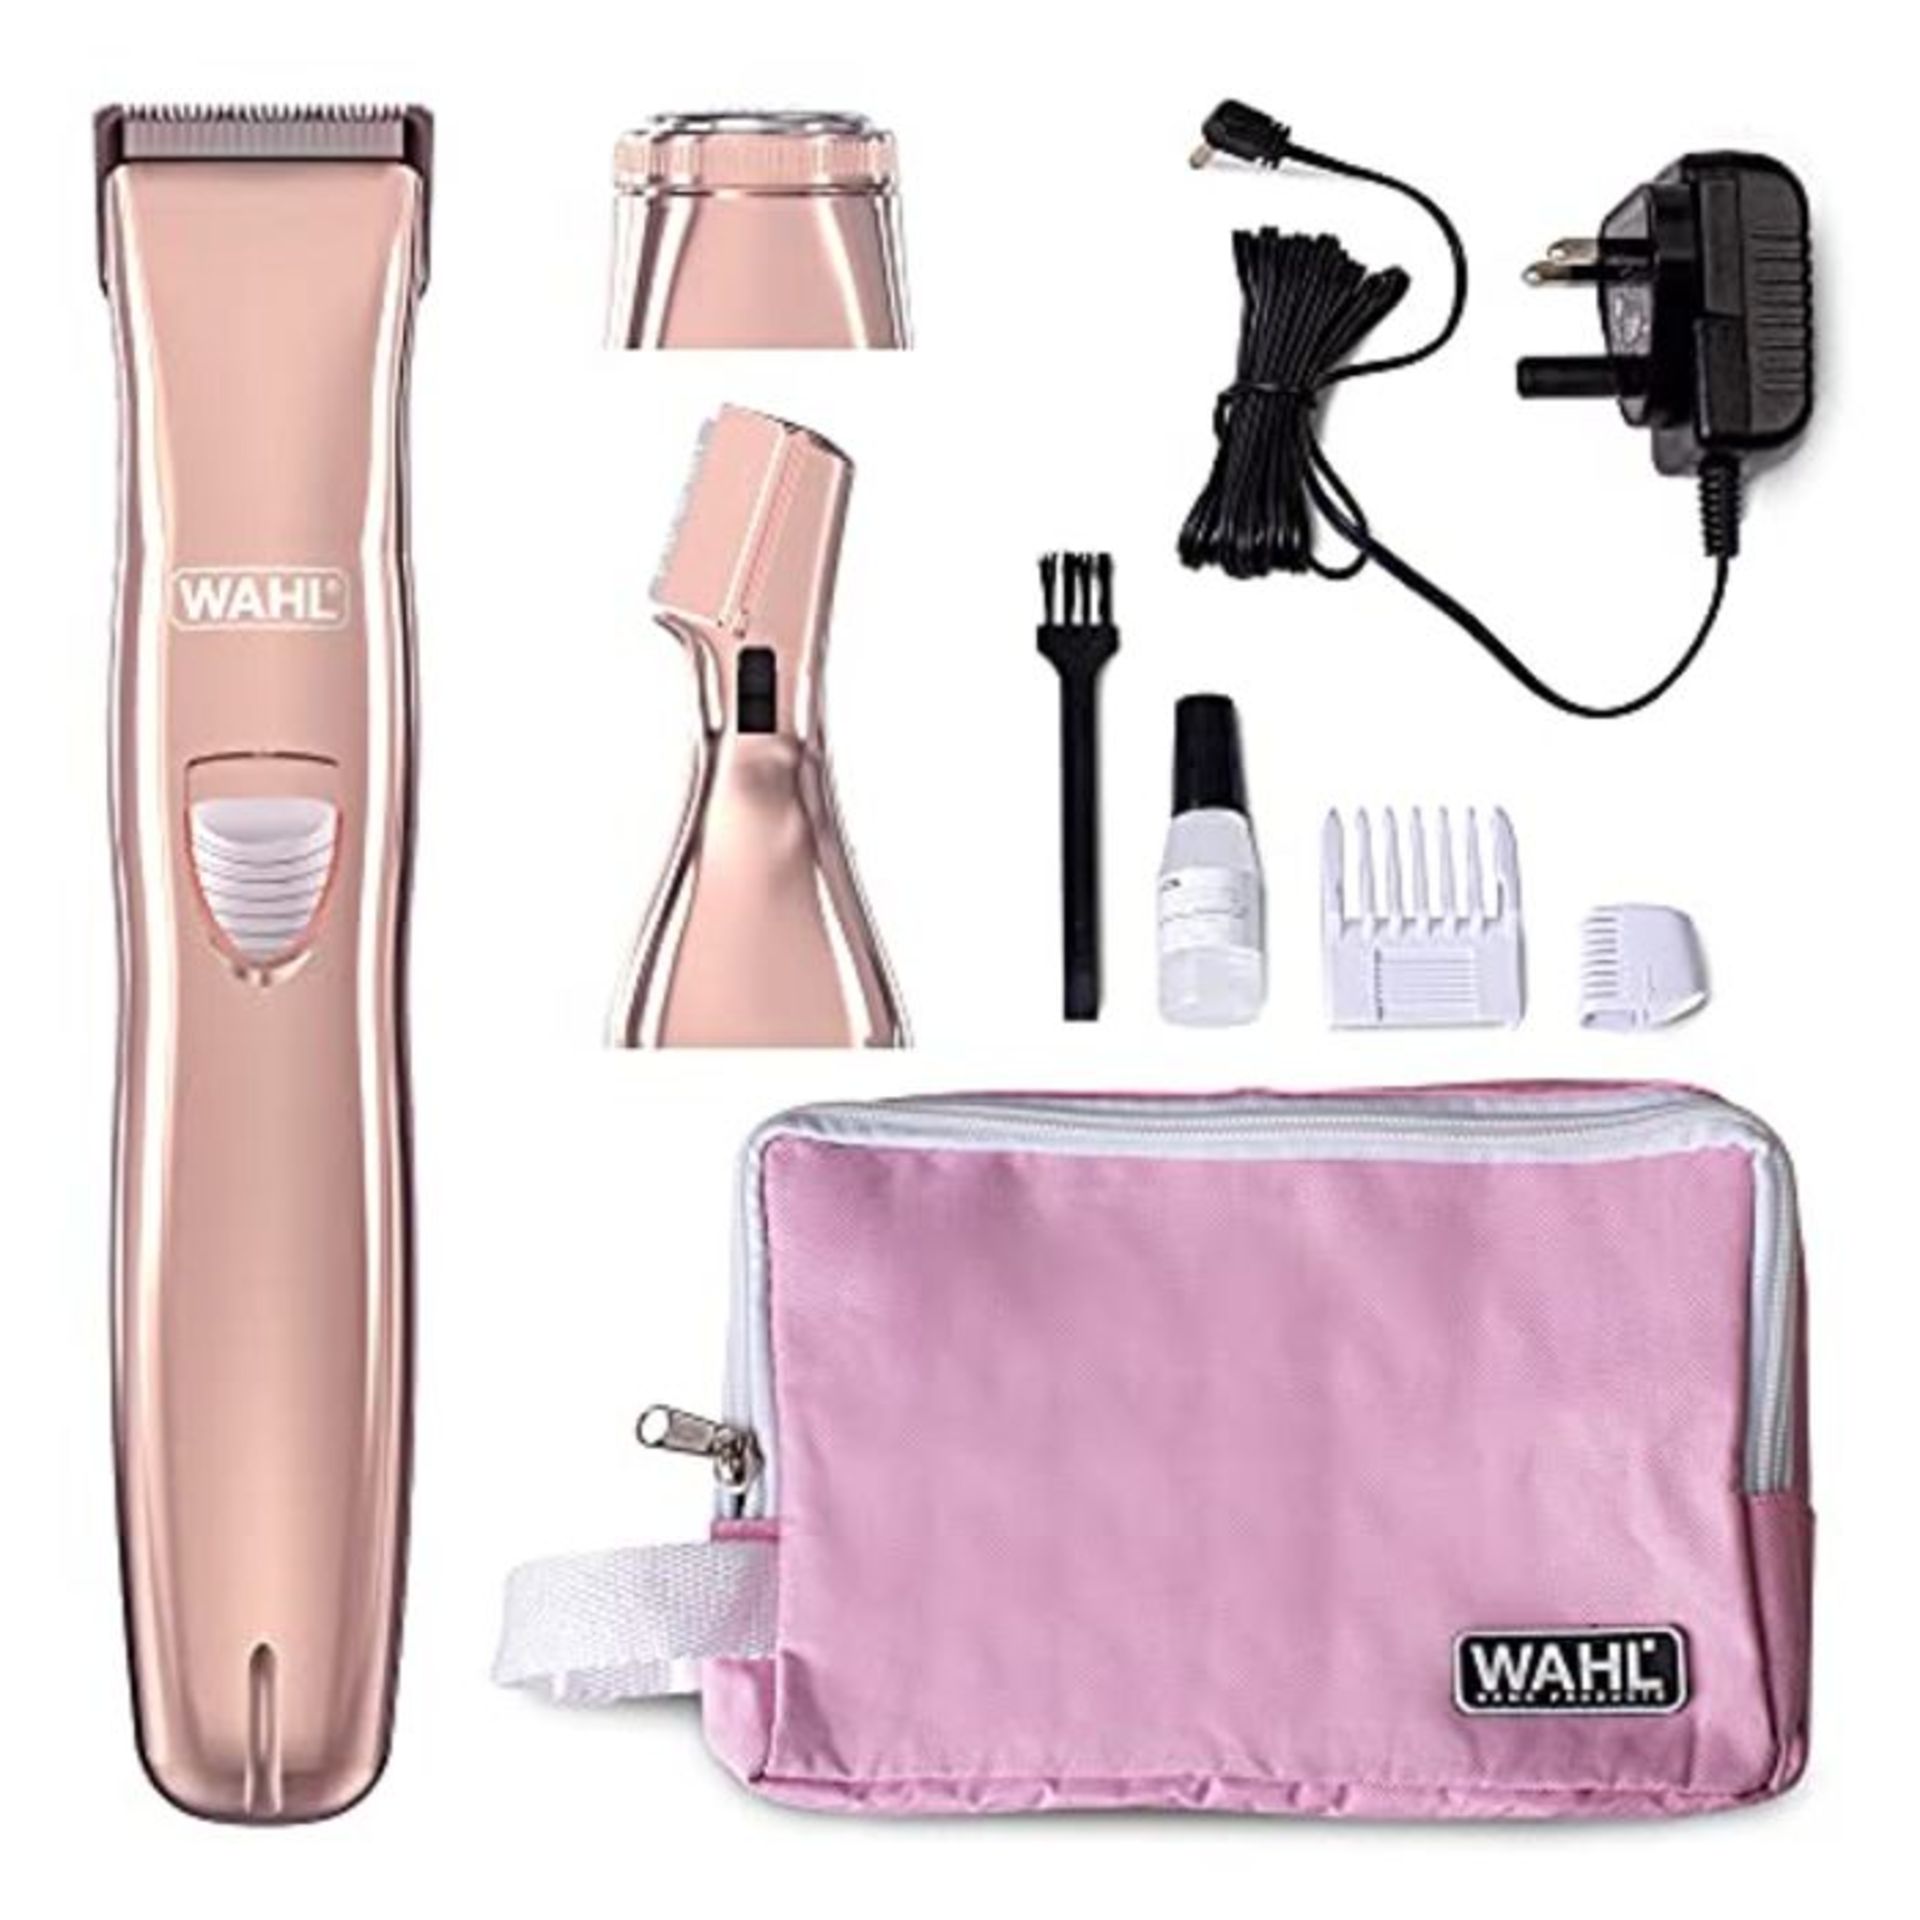 Wahl 3-in-1 Ladies Face and Body Hair Remover - Female Rotary Shaver and Eyebrow Shape